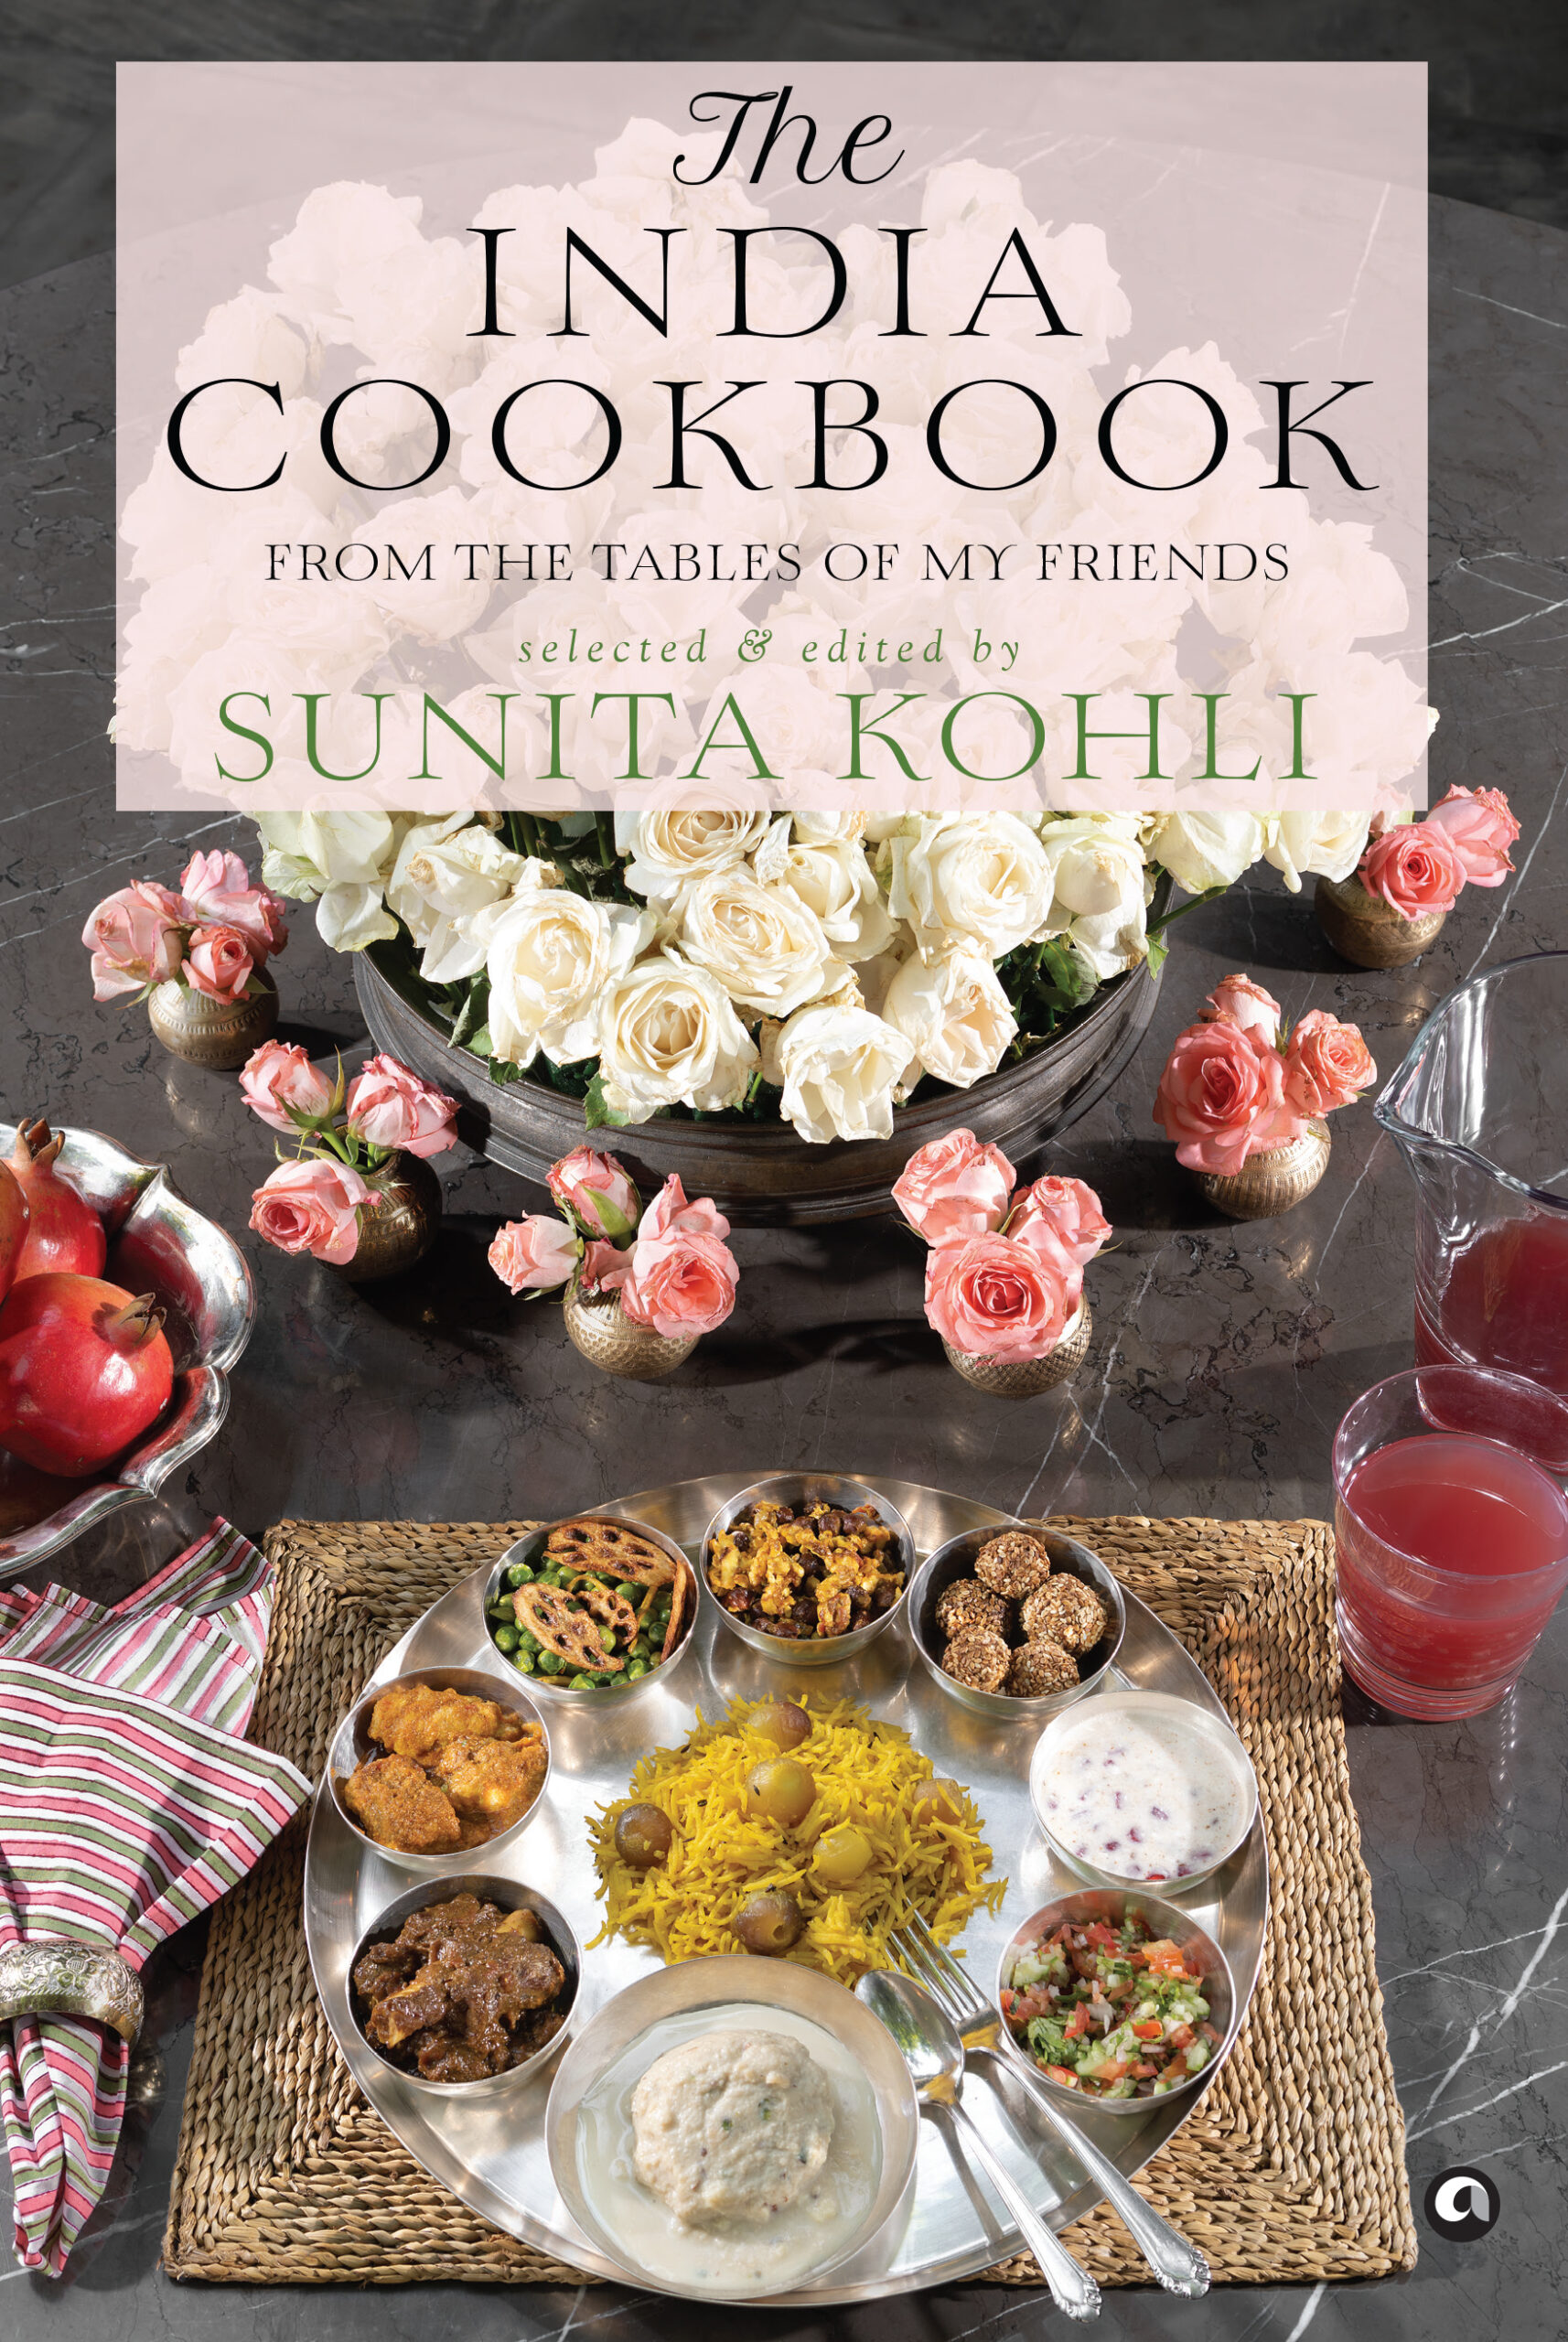 The India Cookbook: From the Tables of My Friends